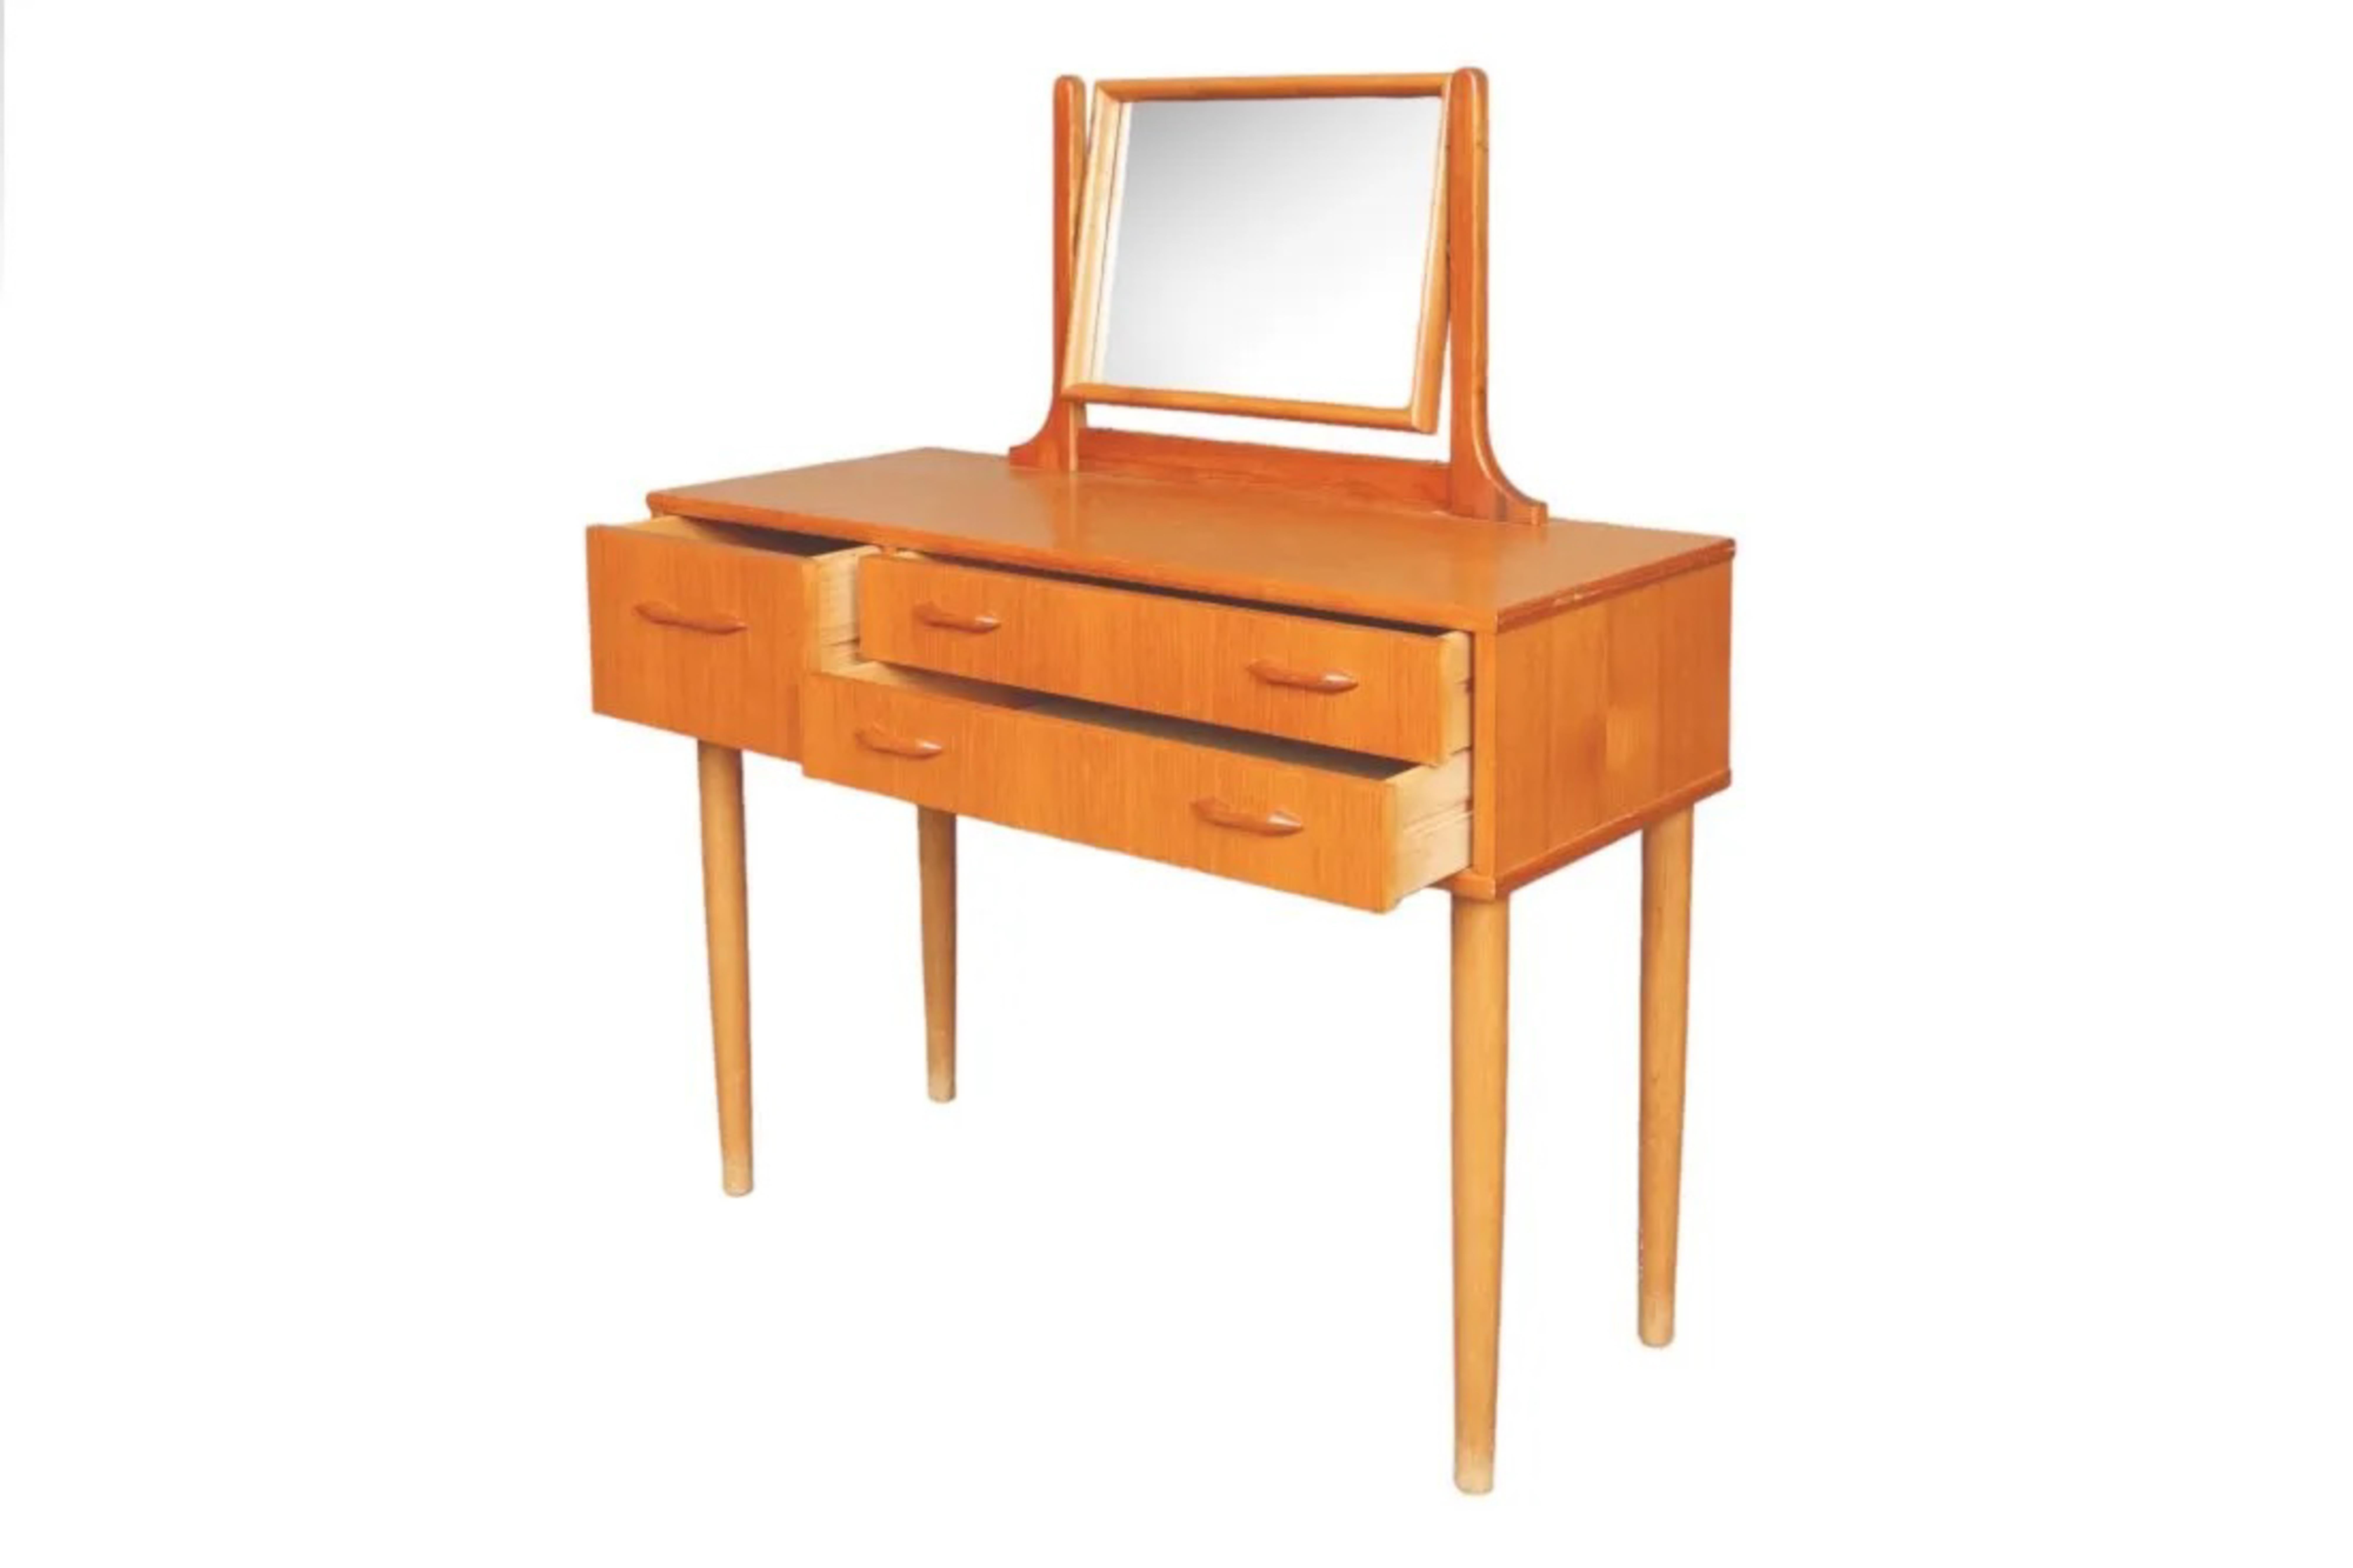 Heavy Mid-Century Solid Teak Vanity/desk 1960's W37 x D15 x H44 inches with to p of the mirror Desk height : 28 inches Floor to bottom drawer hight 20 inches
Condition

very good
